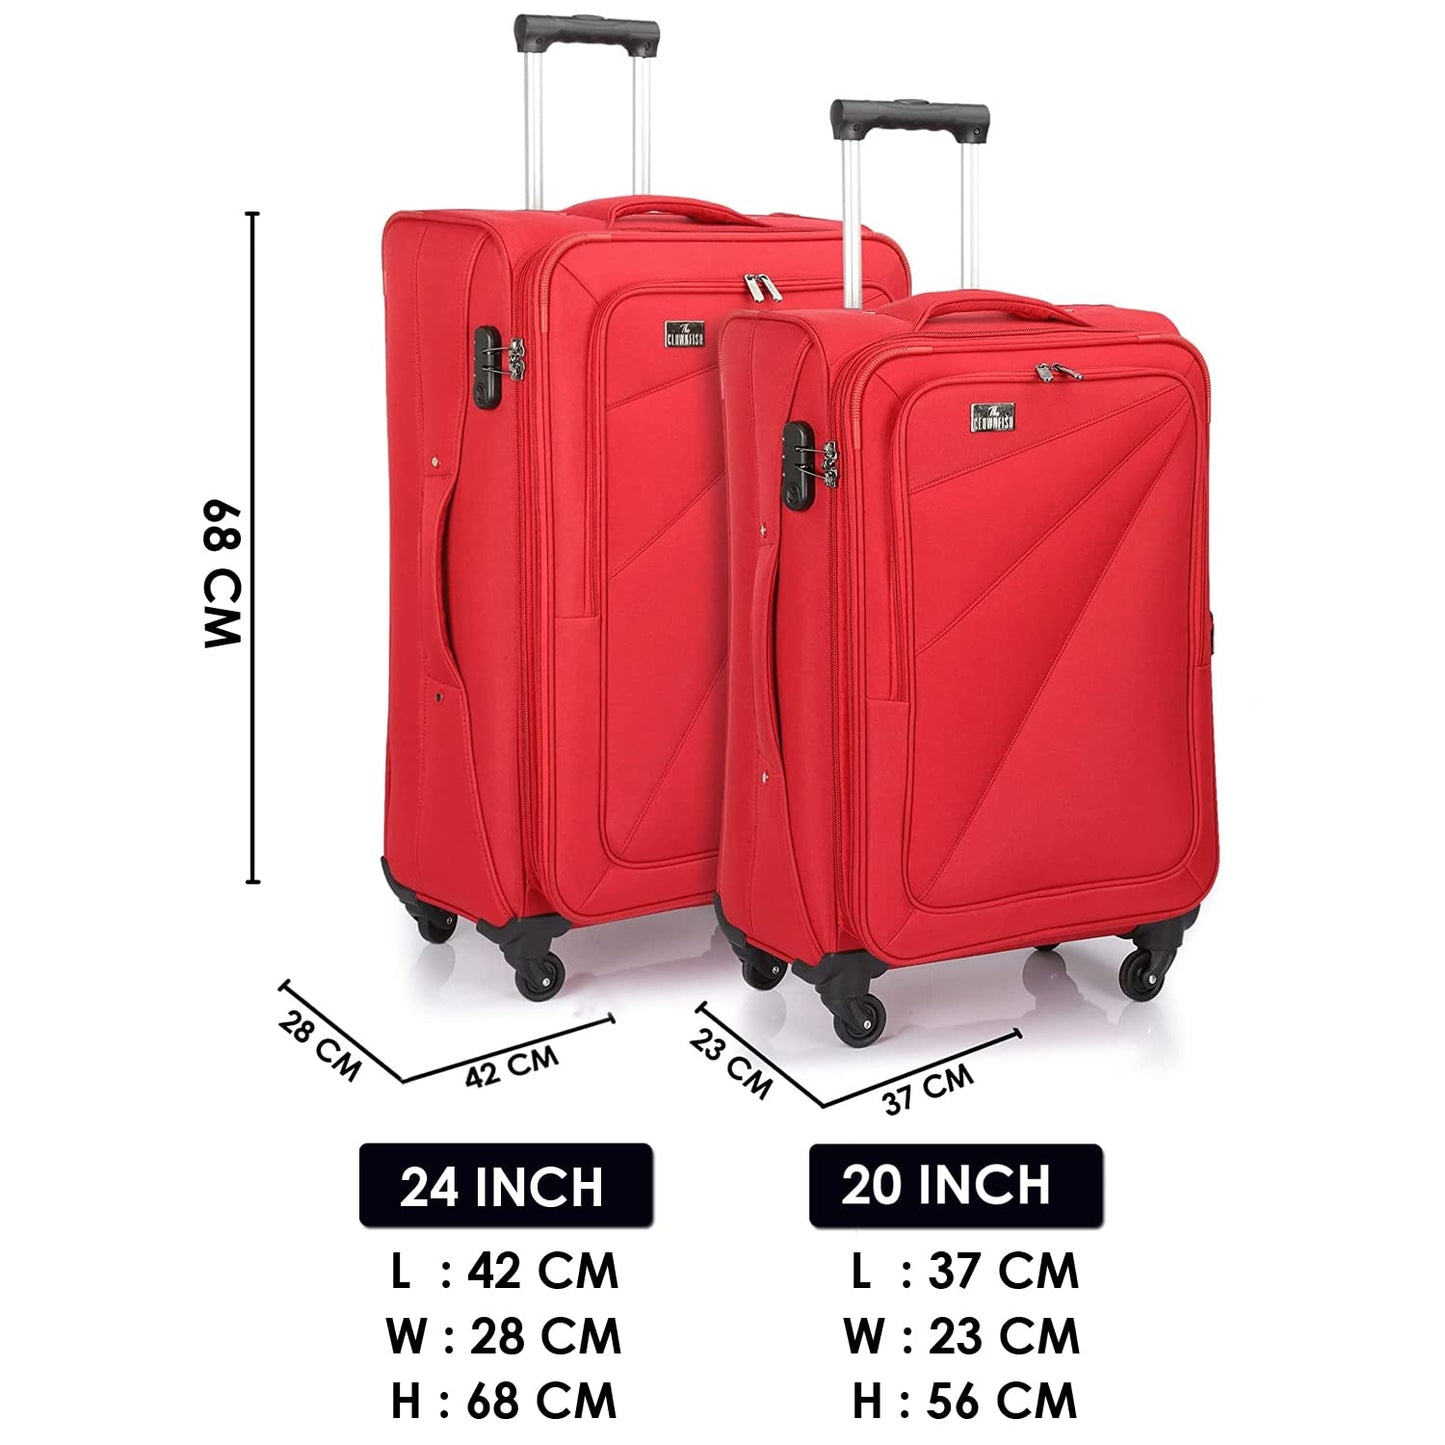 THE CLOWNFISH Combo of 2 Farren Series Luggage Polyester Softcase Suitcases Varied Sizes Four Wheel Trolley Bags - Red (68 cm, 56 cm)